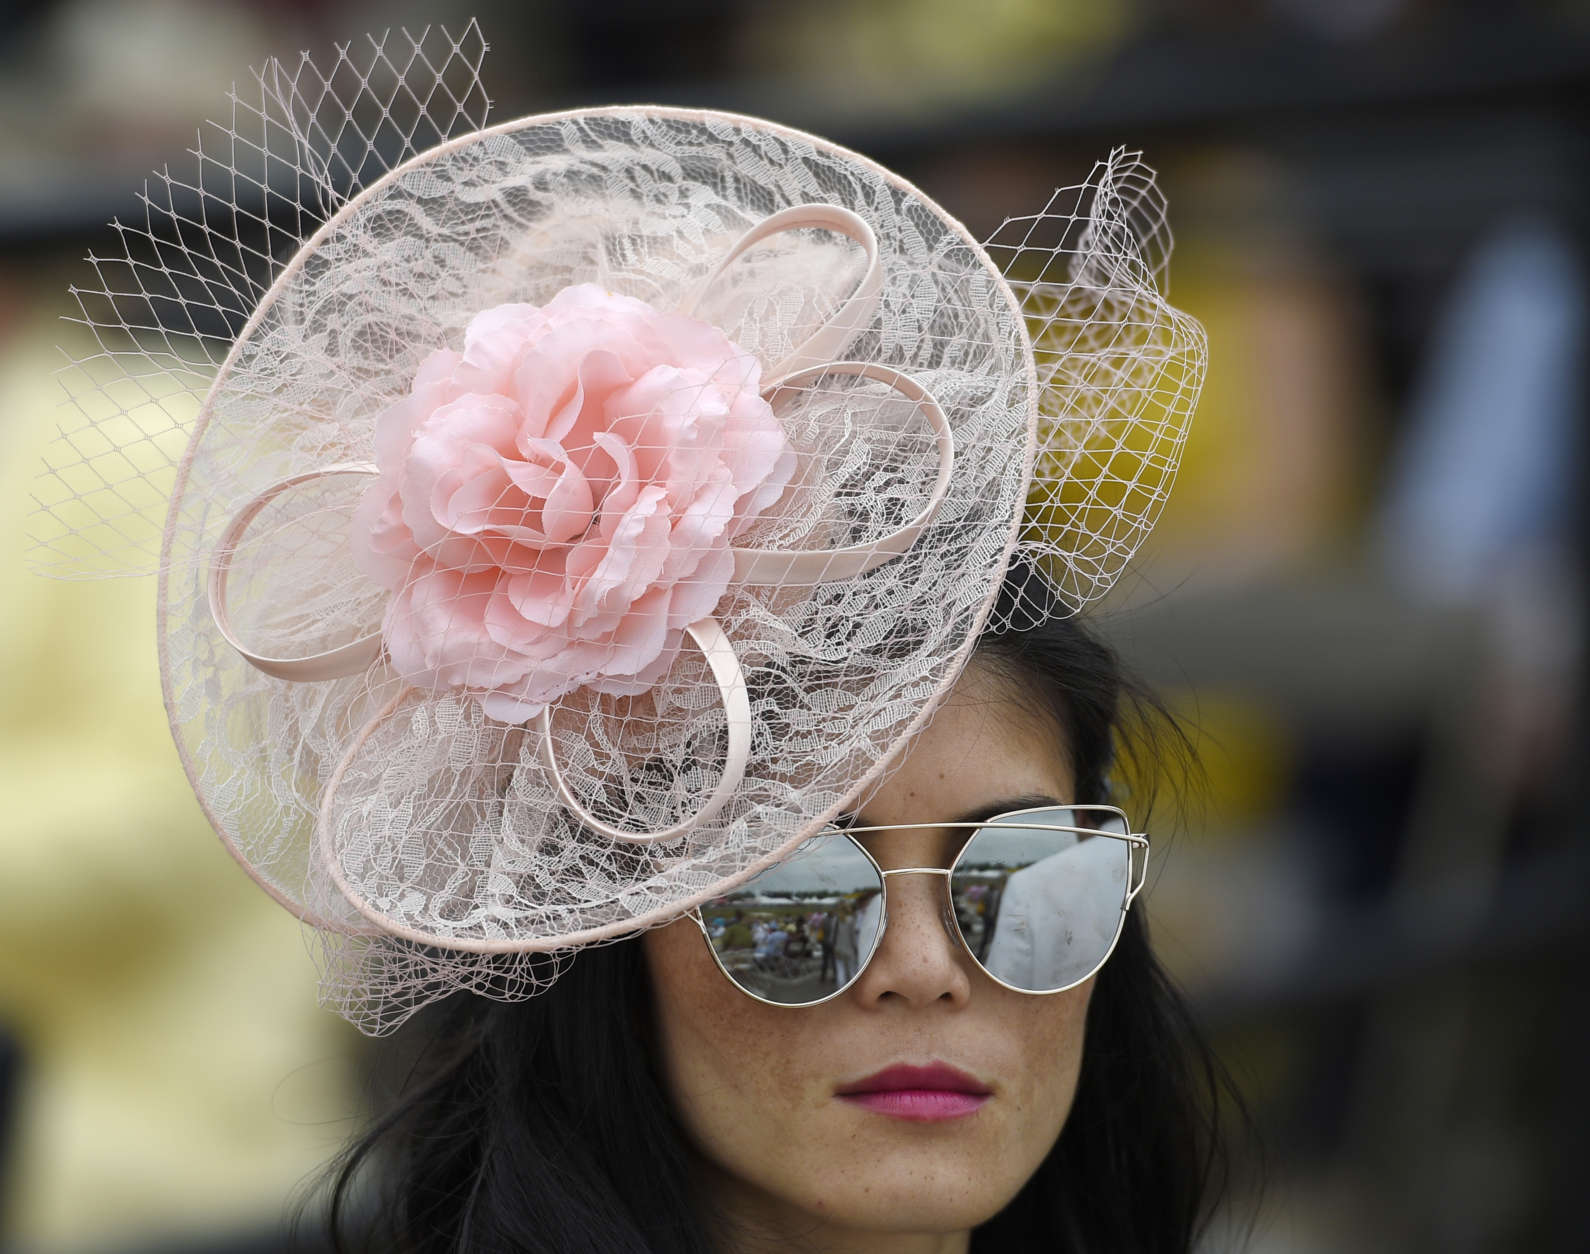 A woman walks through the grandstand ahead of the running of the 142nd Preakness Stakes horse race at Pimlico race course, Saturday, May 20, 2017, in Baltimore. (AP Photo/Nick Wass)